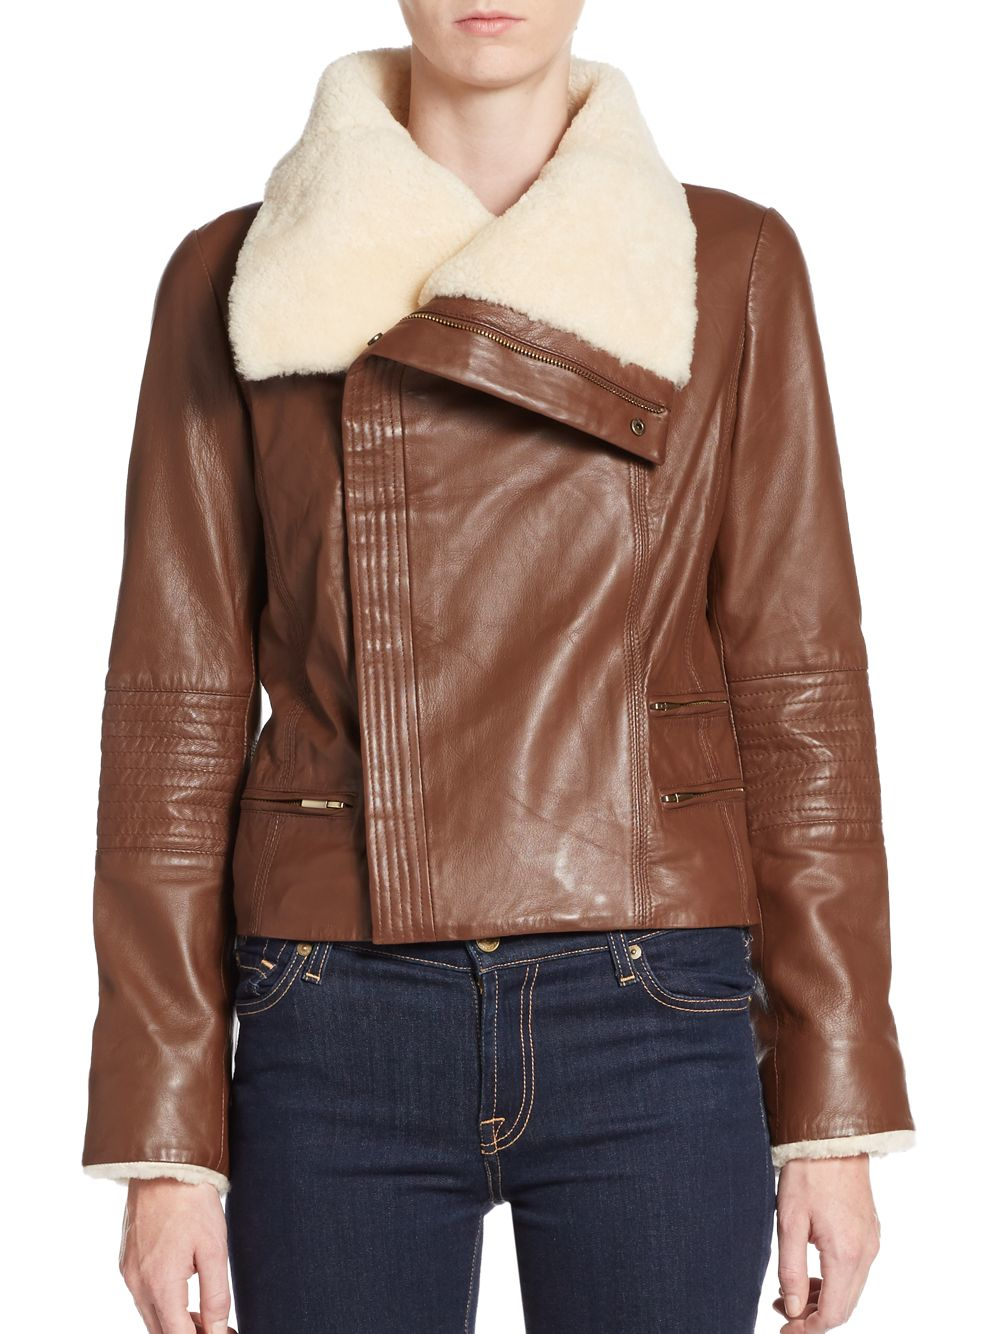 Lyst - Badgley mischka Shearling-trimmed Leather Jacket in Brown